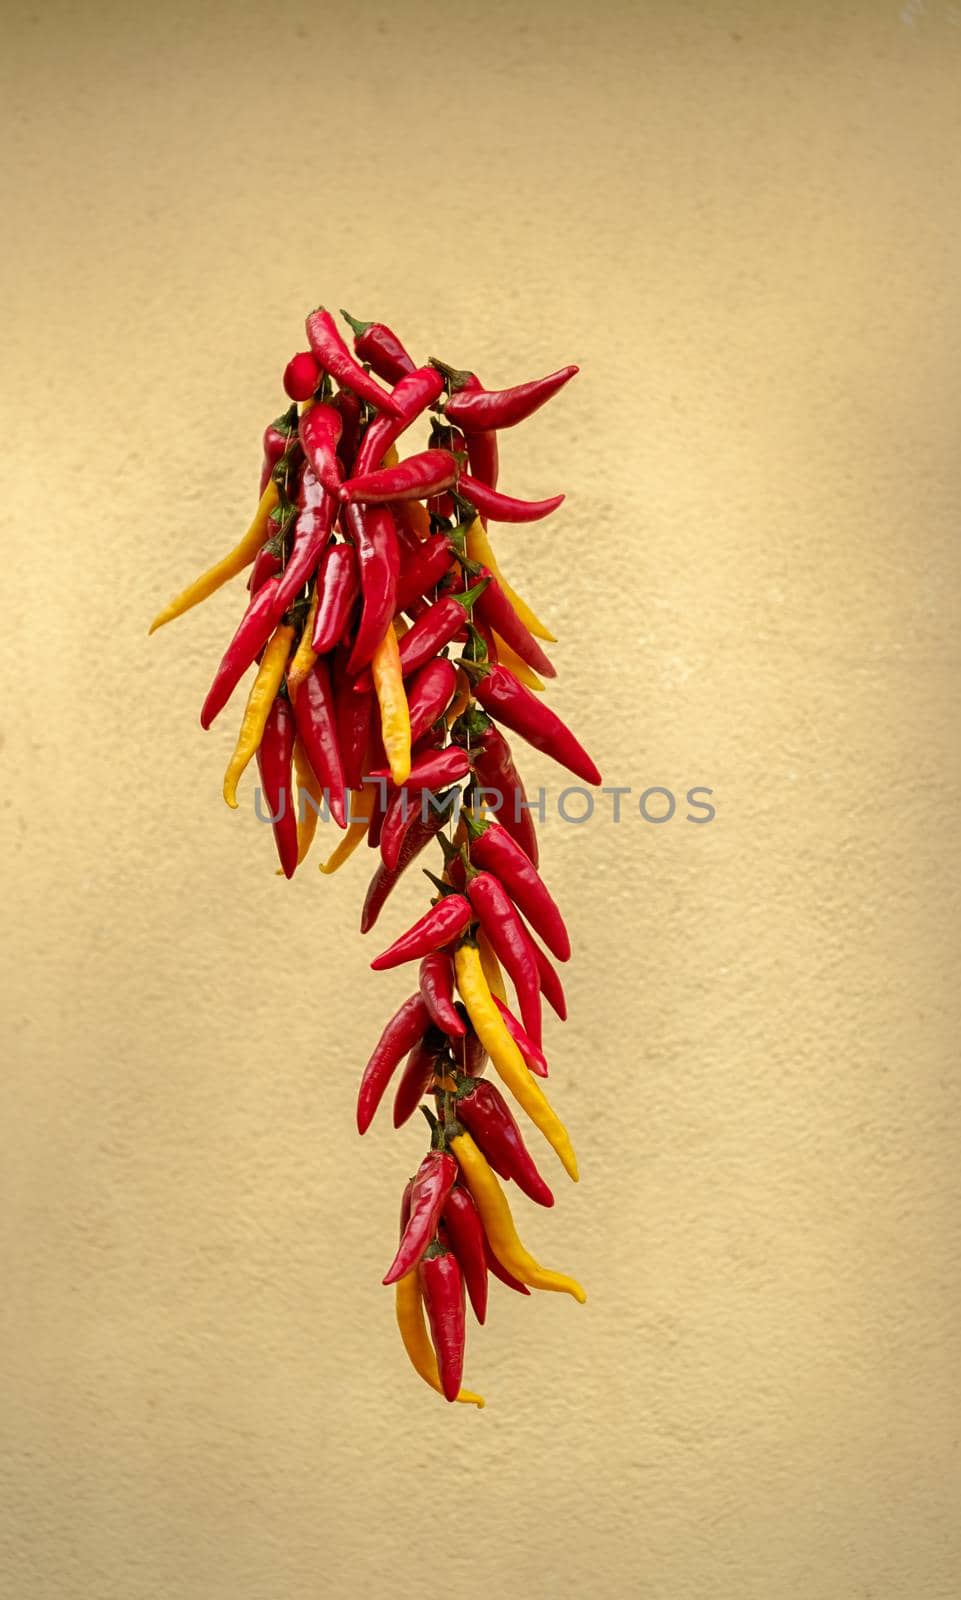 Dried peppers on a thread